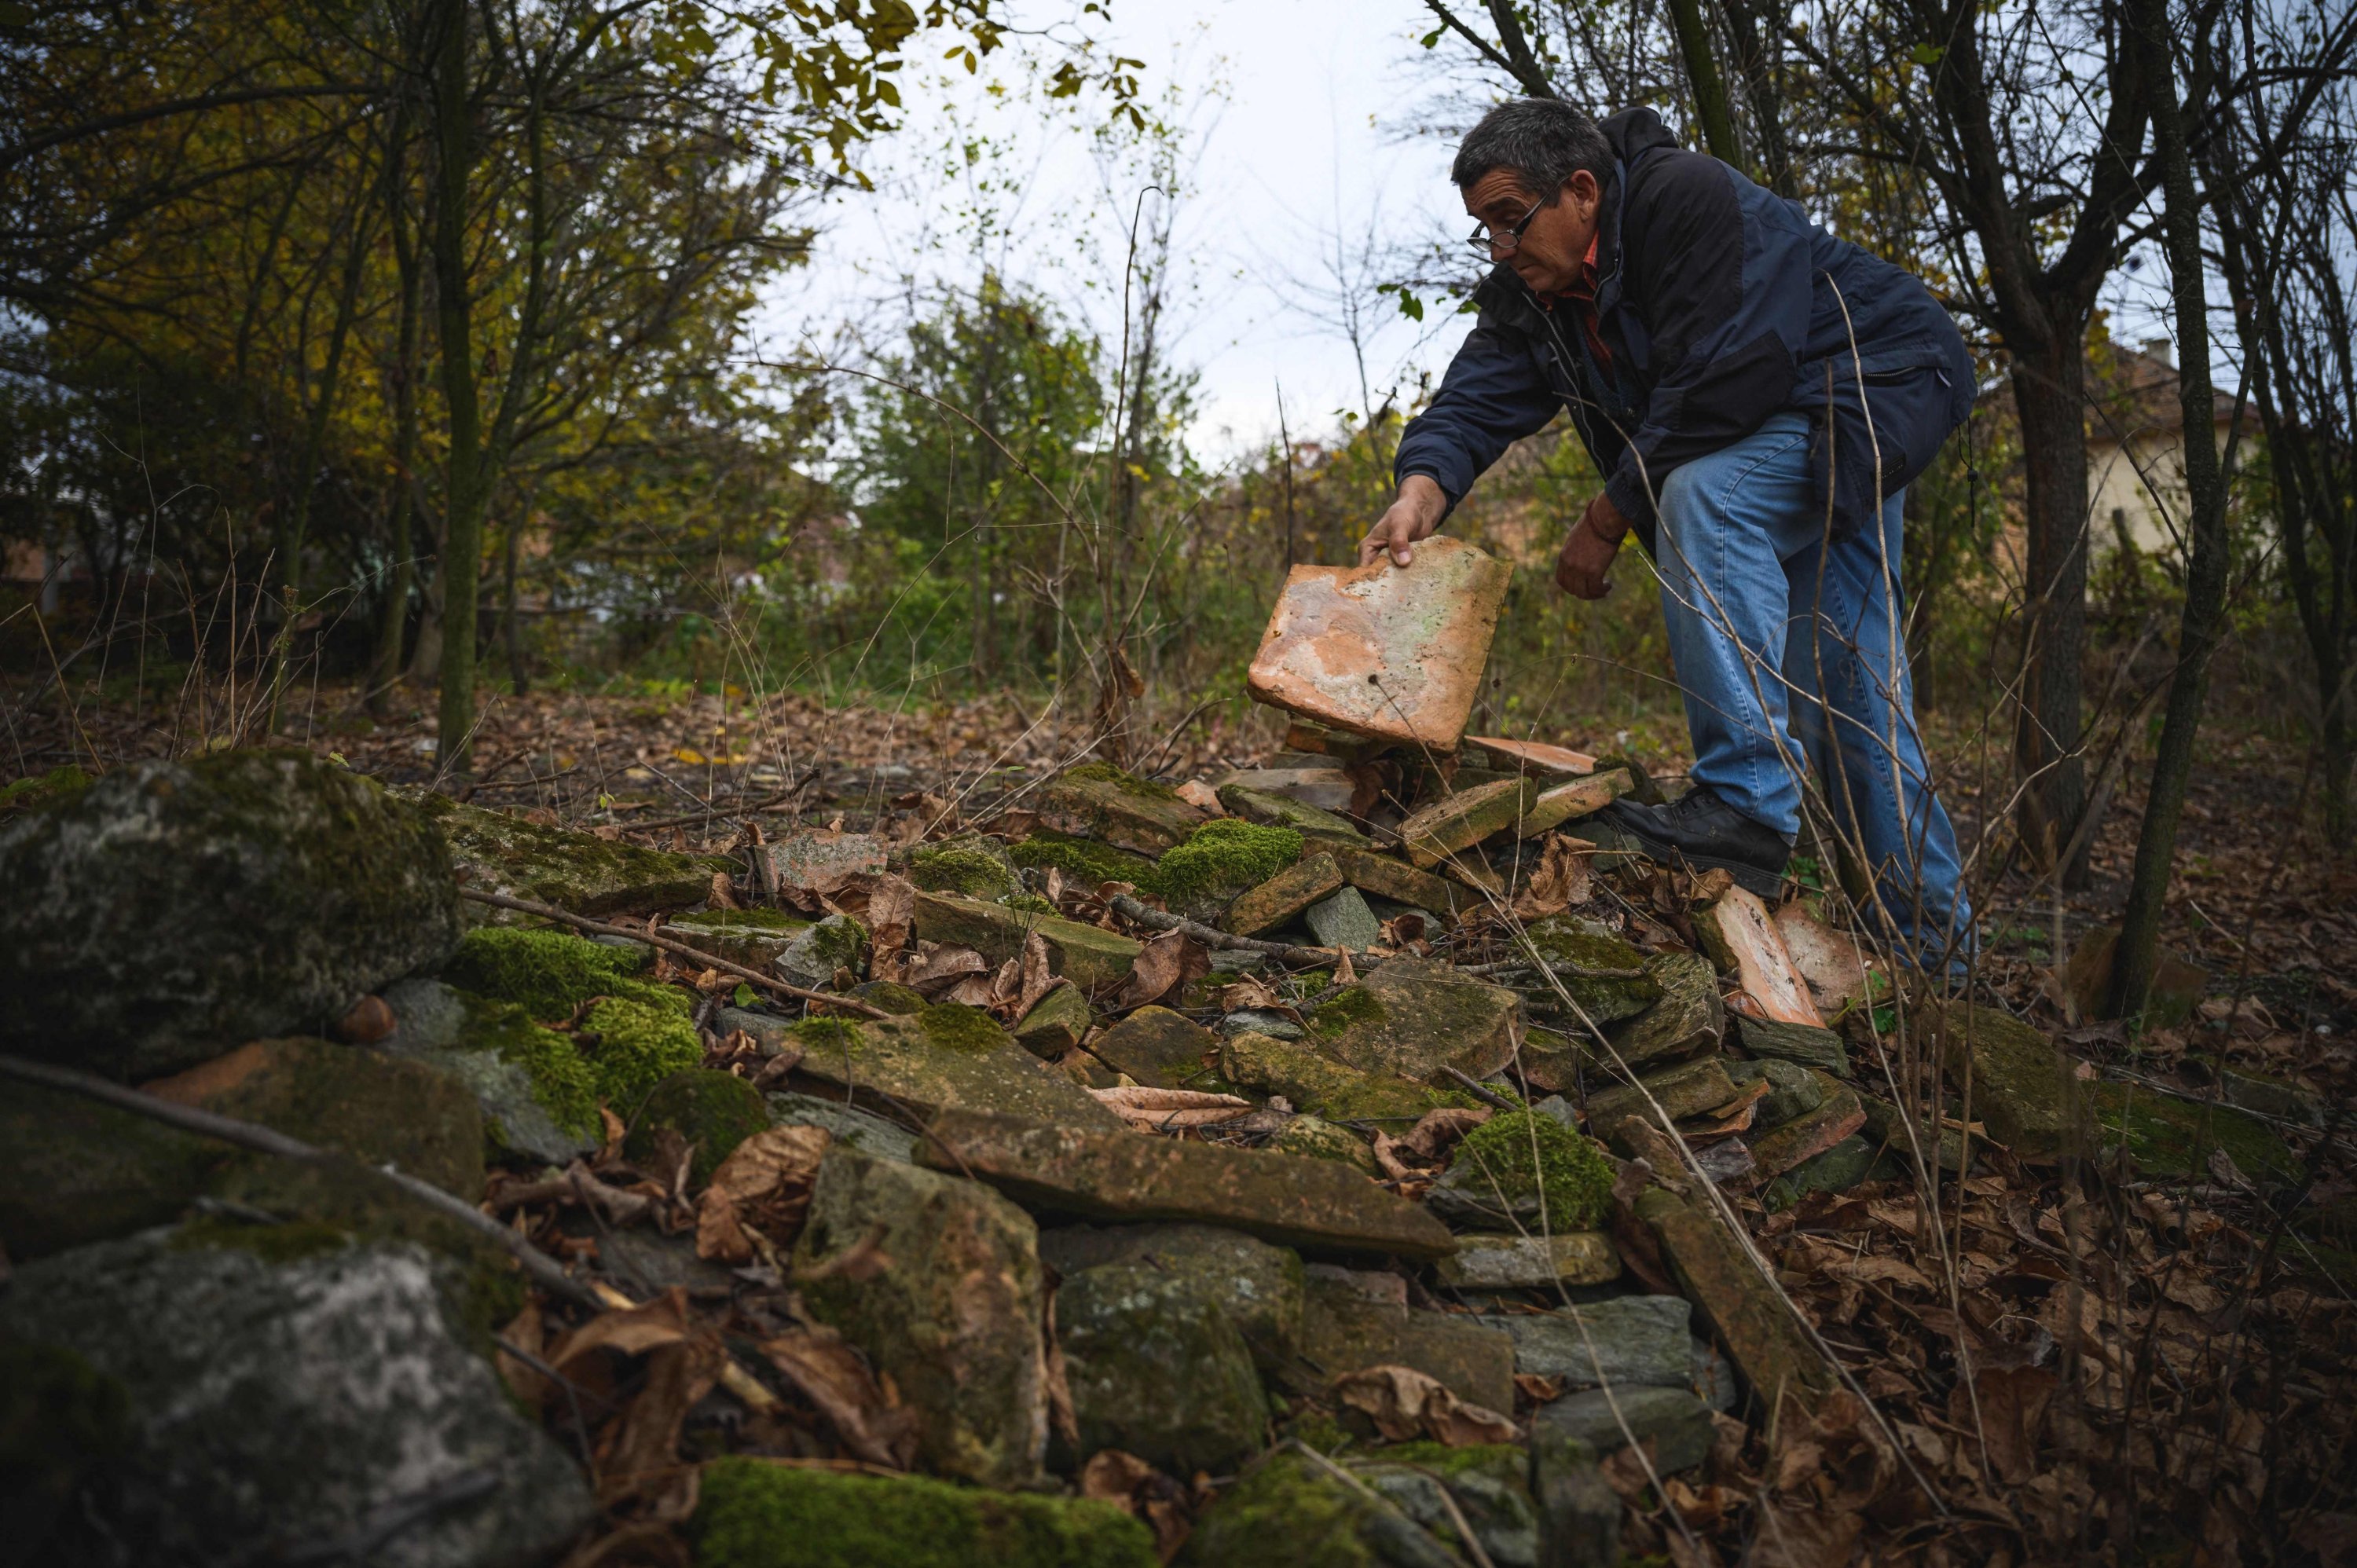 Dragan Jacanovic, an archeologist from the Museum of Pozarevac, shows a brick with Roman stamps on it from a pile, Stari Kostolac, Serbia, Dec. 3, 2021. (AFP Photo)